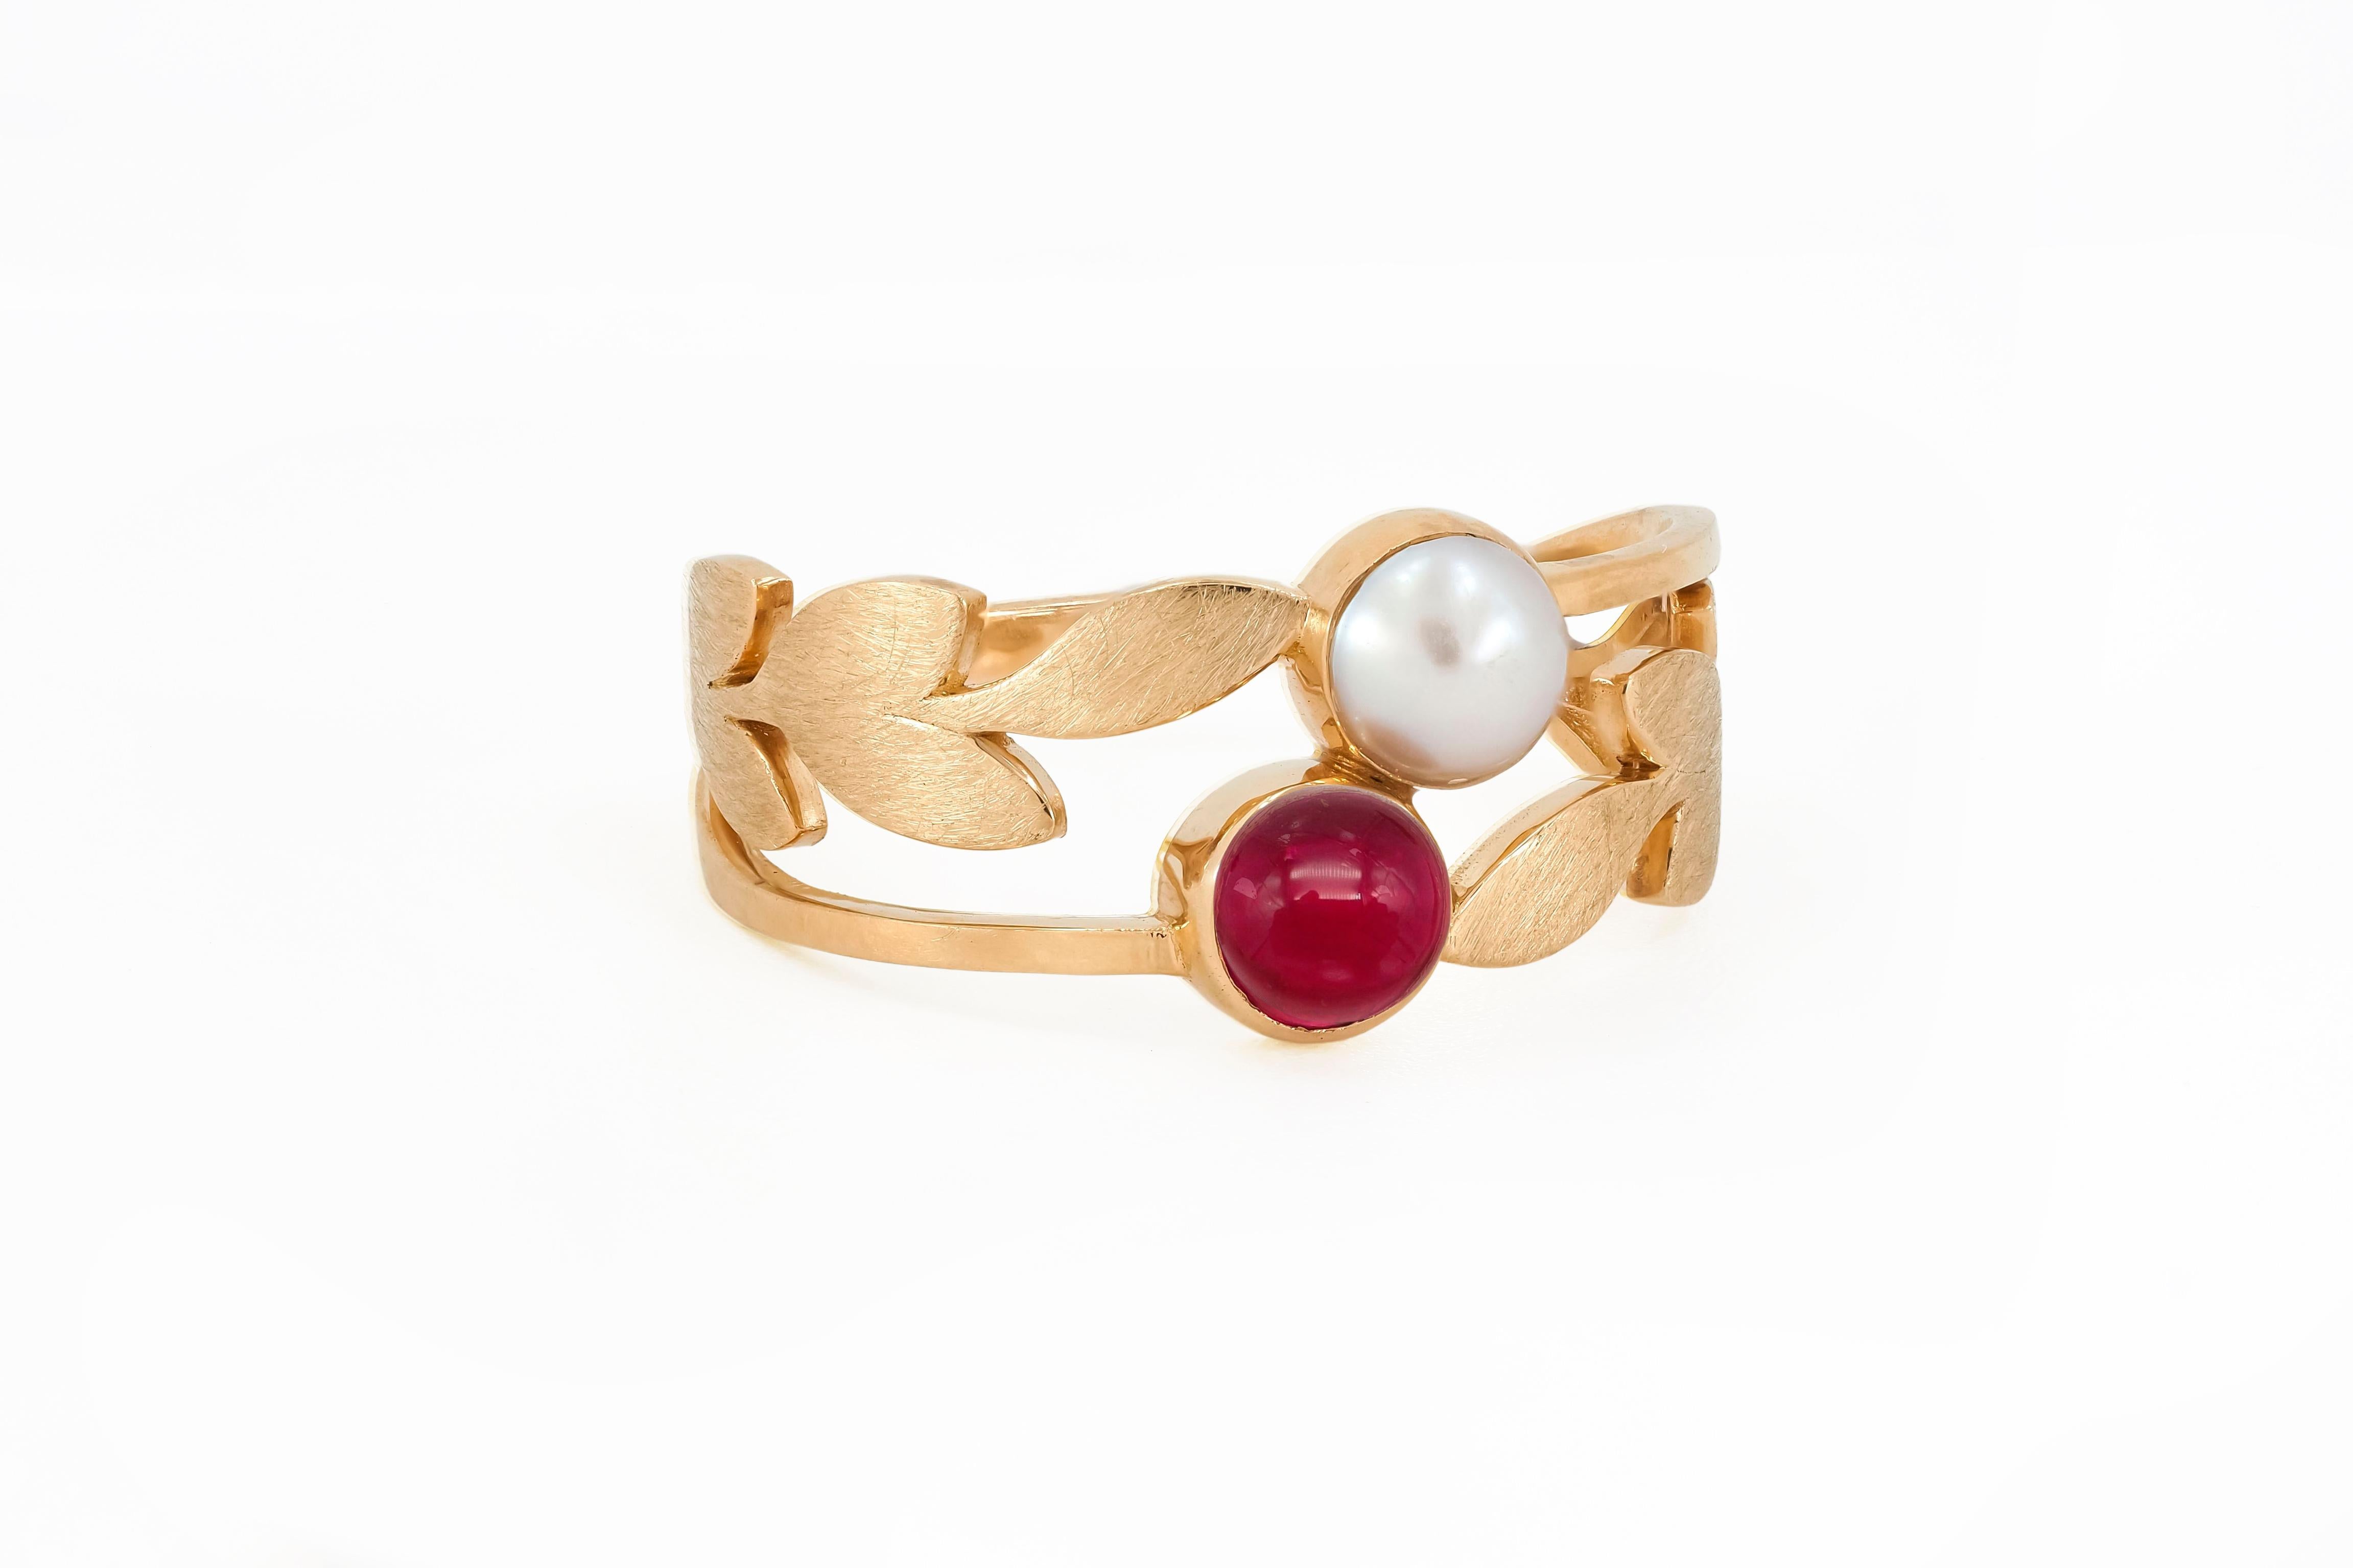 14k gold ring with ruby and pearl. Genuine ruby cabochon and pearl ring in 14k gold. Toi and moi ring with ruby and pearl

Metal: 14k gold
Weight 2.35 gr depends from size

Gemstones  
Ruby
round  cabochon cut, 0.5 ct, transparent, red color.